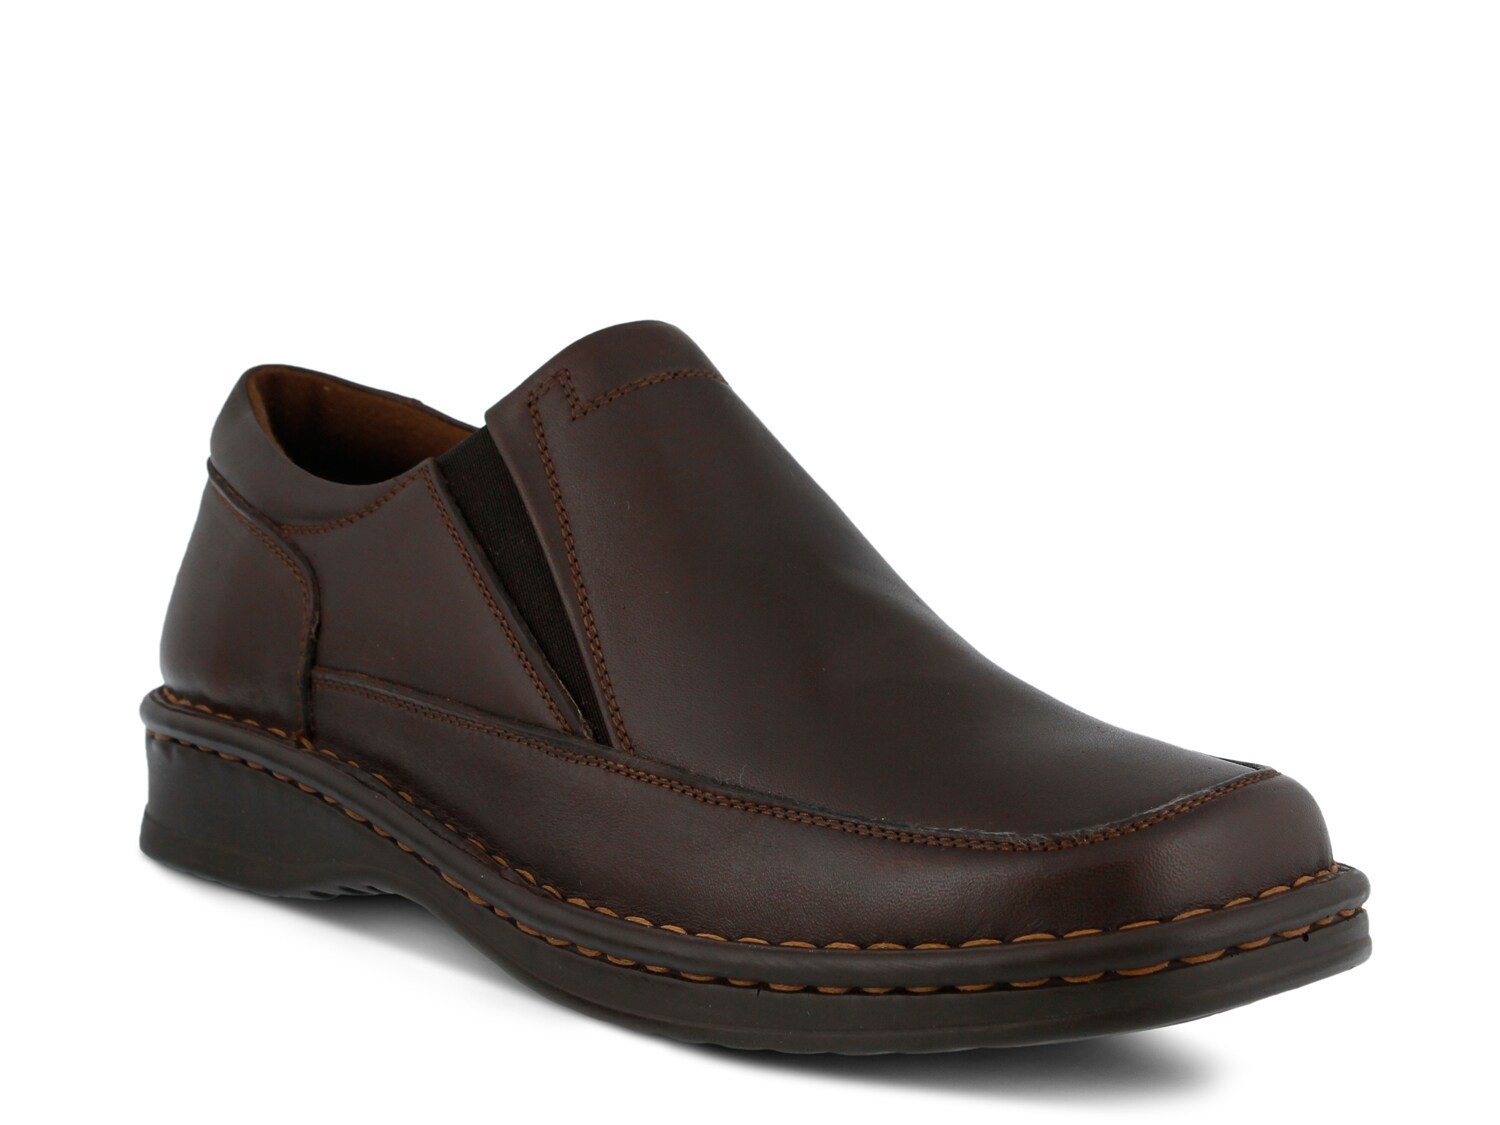 Spring Step Enzo Slip-On - Free Shipping | DSW